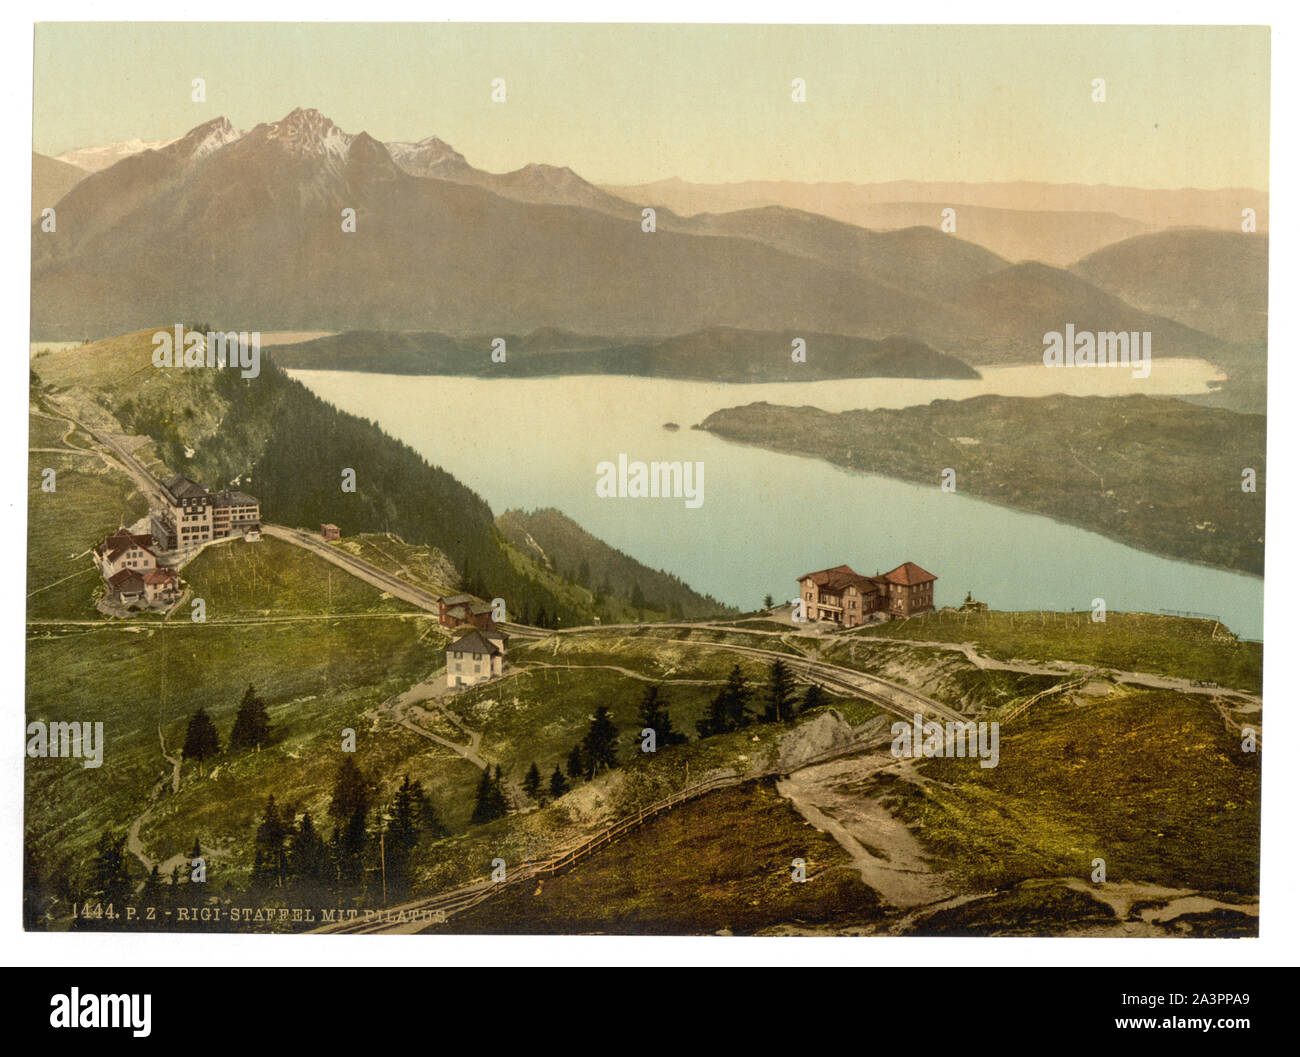 Staffel and Mount Pilatus, Rigi, Switzerland Print no. 1444. Forms part of: Views of Switzerland in the Photochrom print collection. Title devised by Library staff. Stock Photo